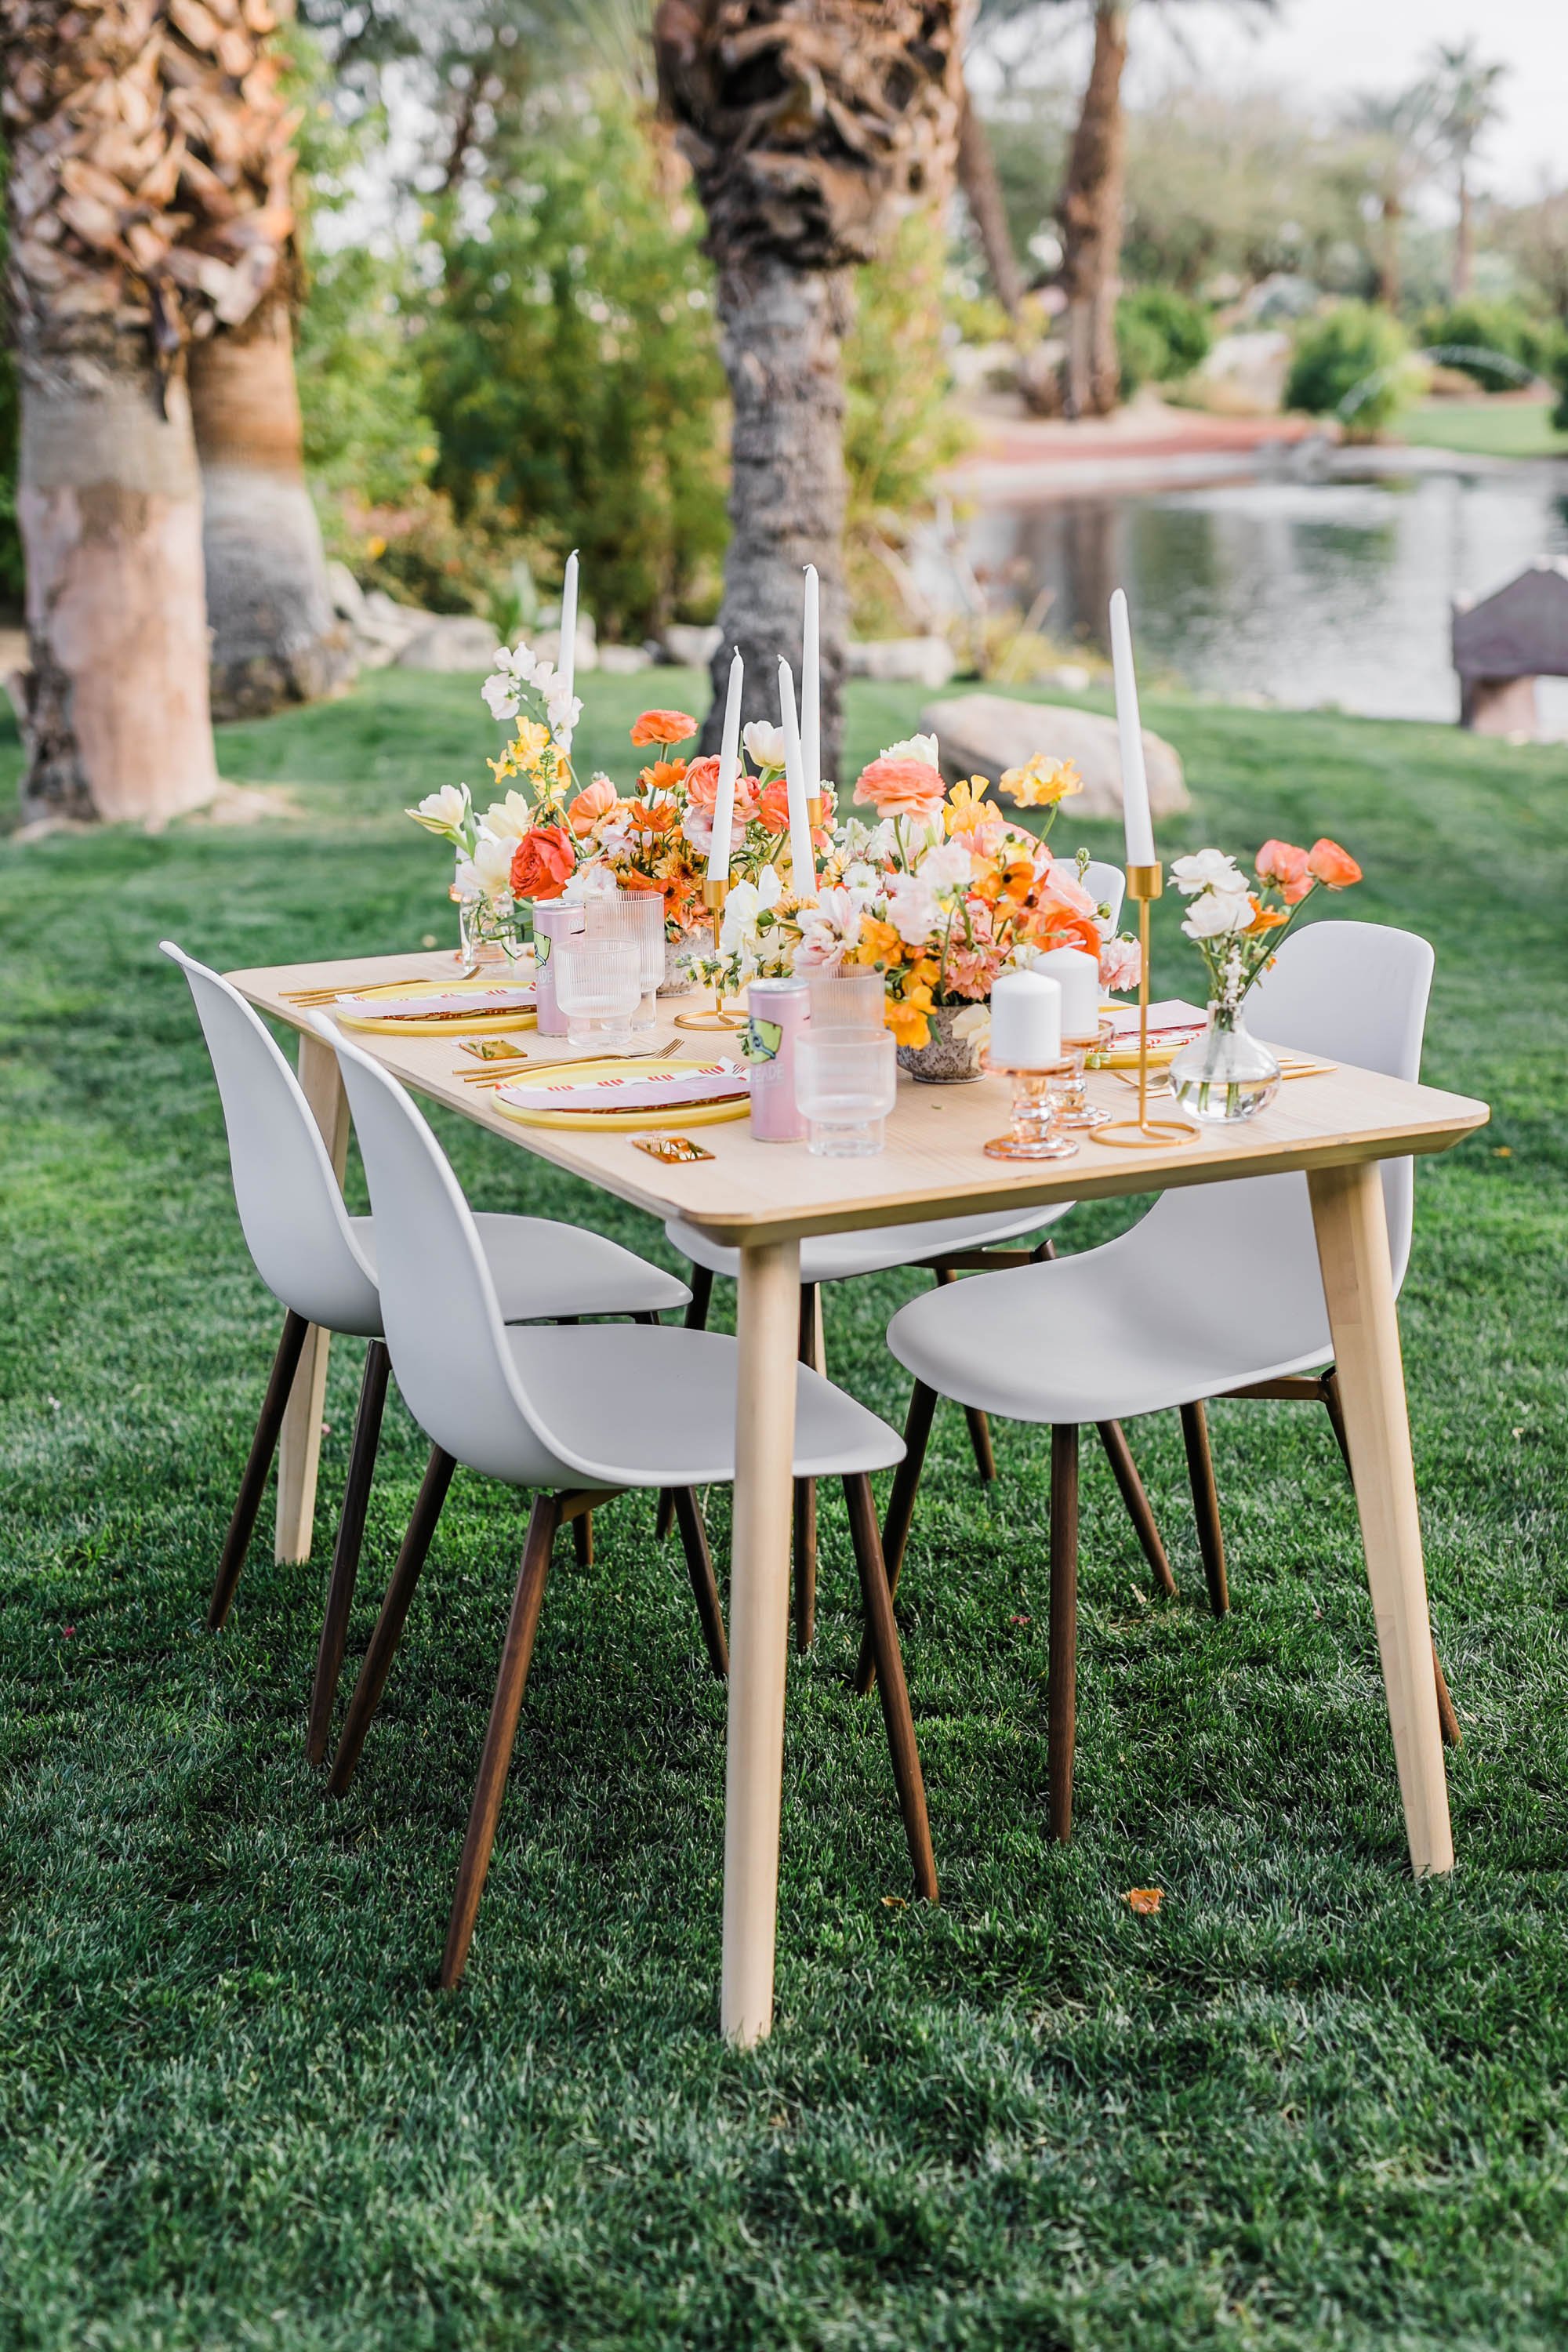 Bright sunny reception flowers and wedding decor at Palm Springs wedding elopement at Bougainvillea Estate.